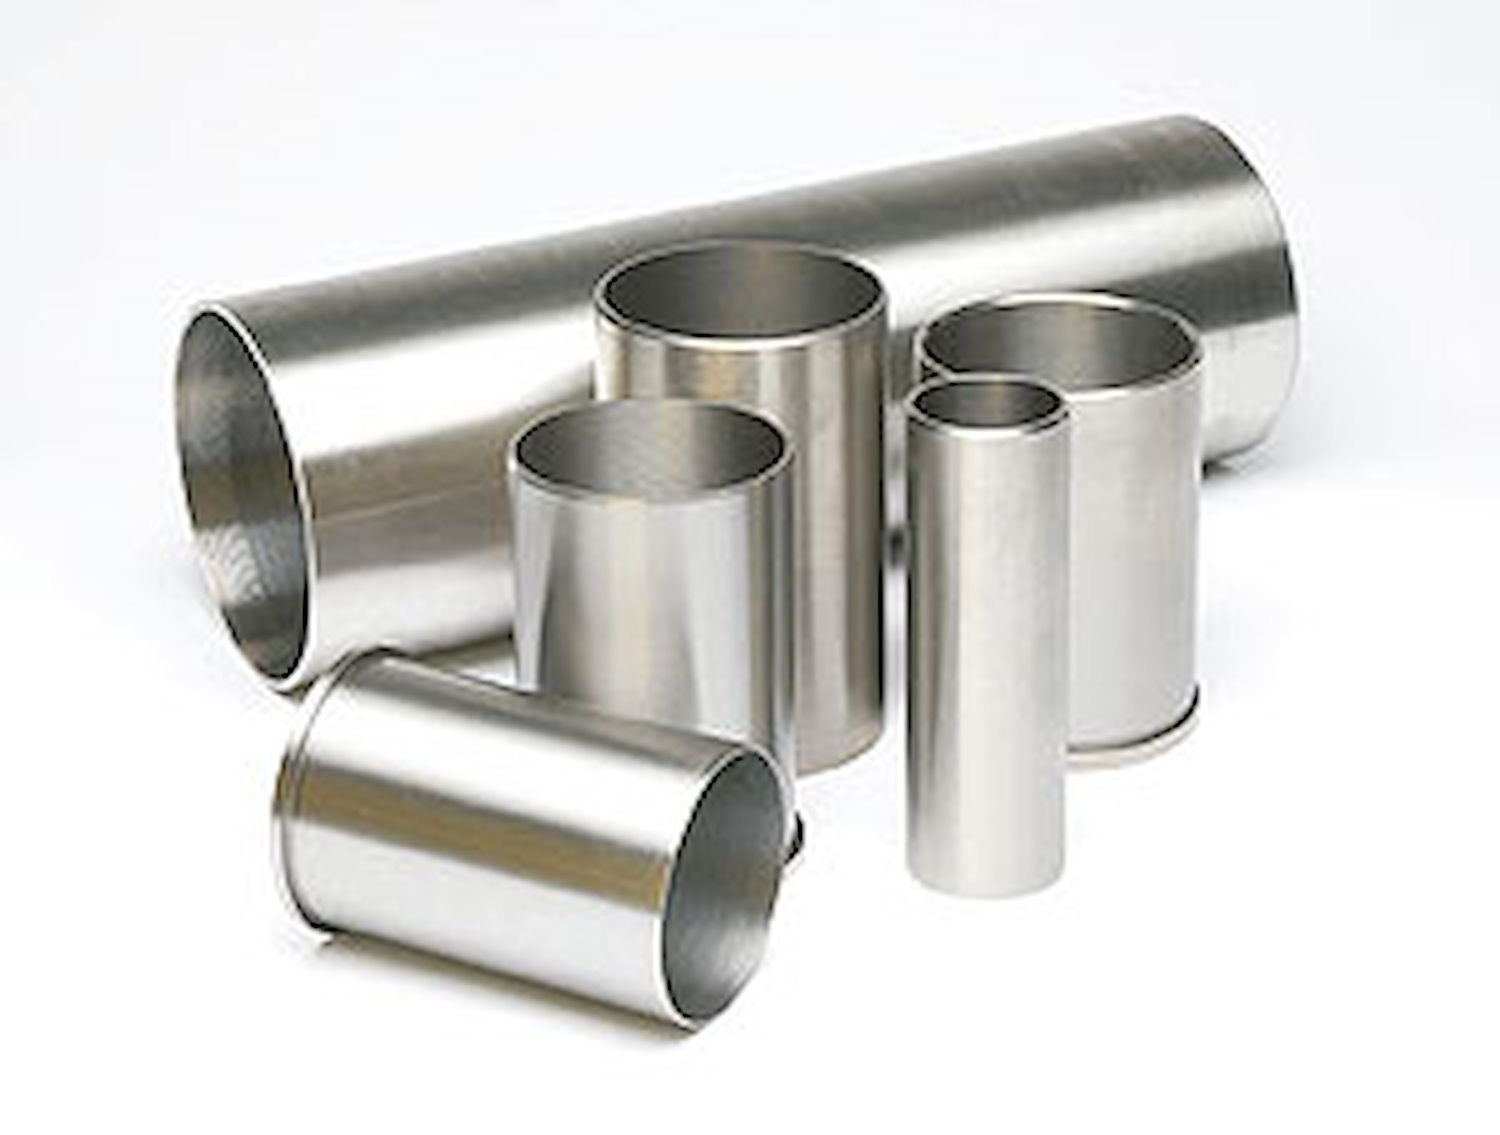 Cylinder Sleeve Bore: 3.1250" Length: 6-7/8" Wall Thickness: 1/8"